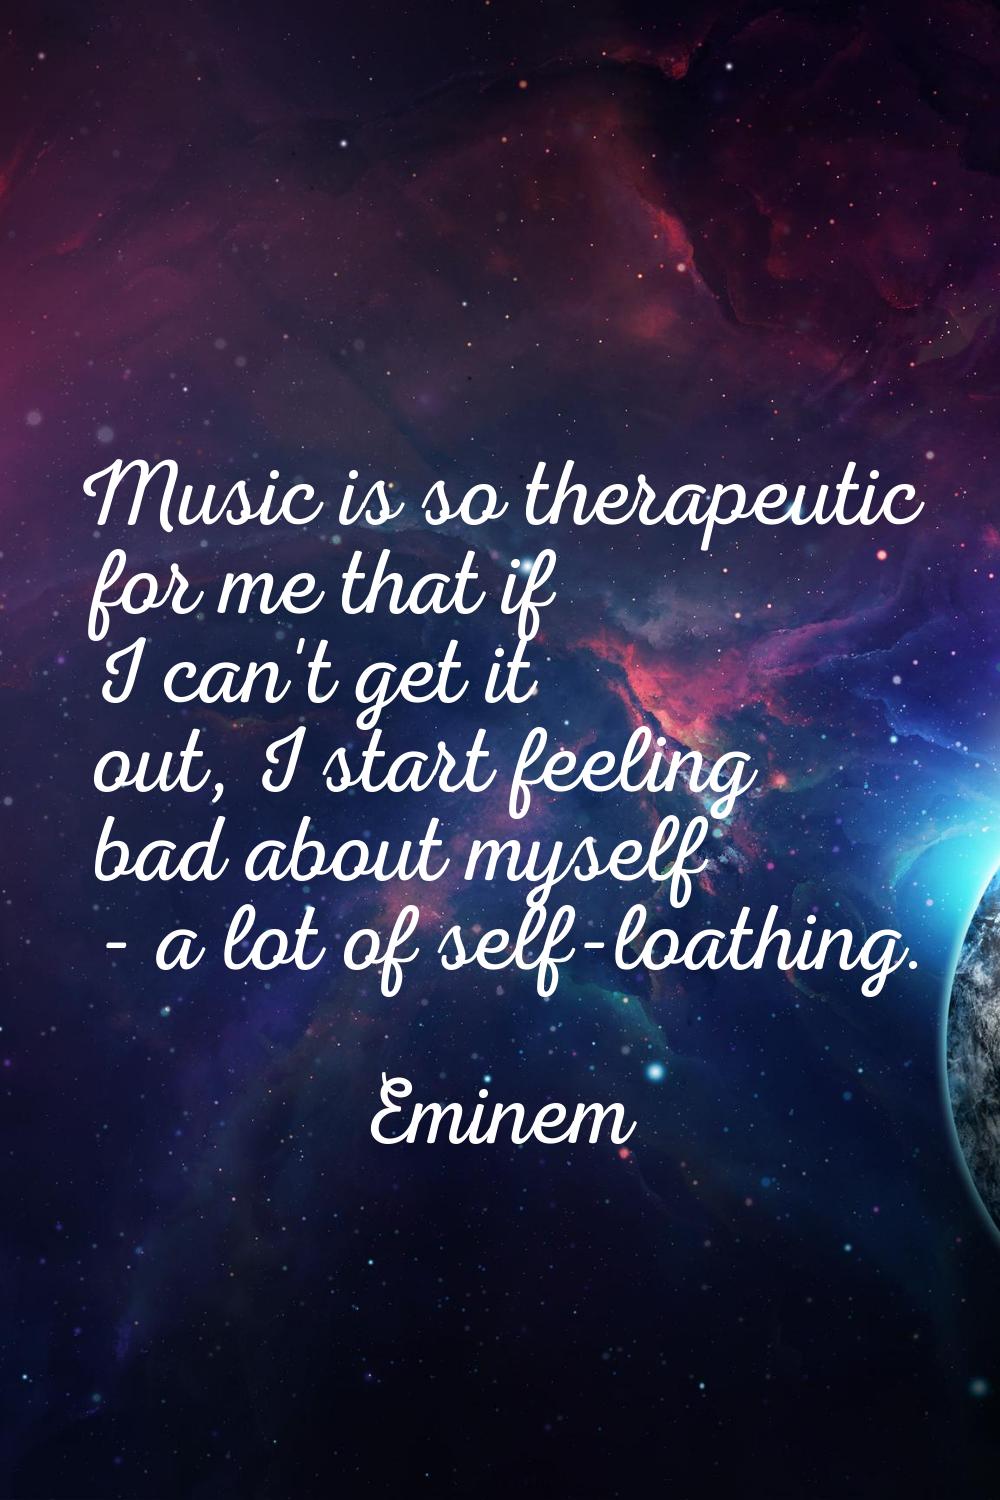 Music is so therapeutic for me that if I can't get it out, I start feeling bad about myself - a lot